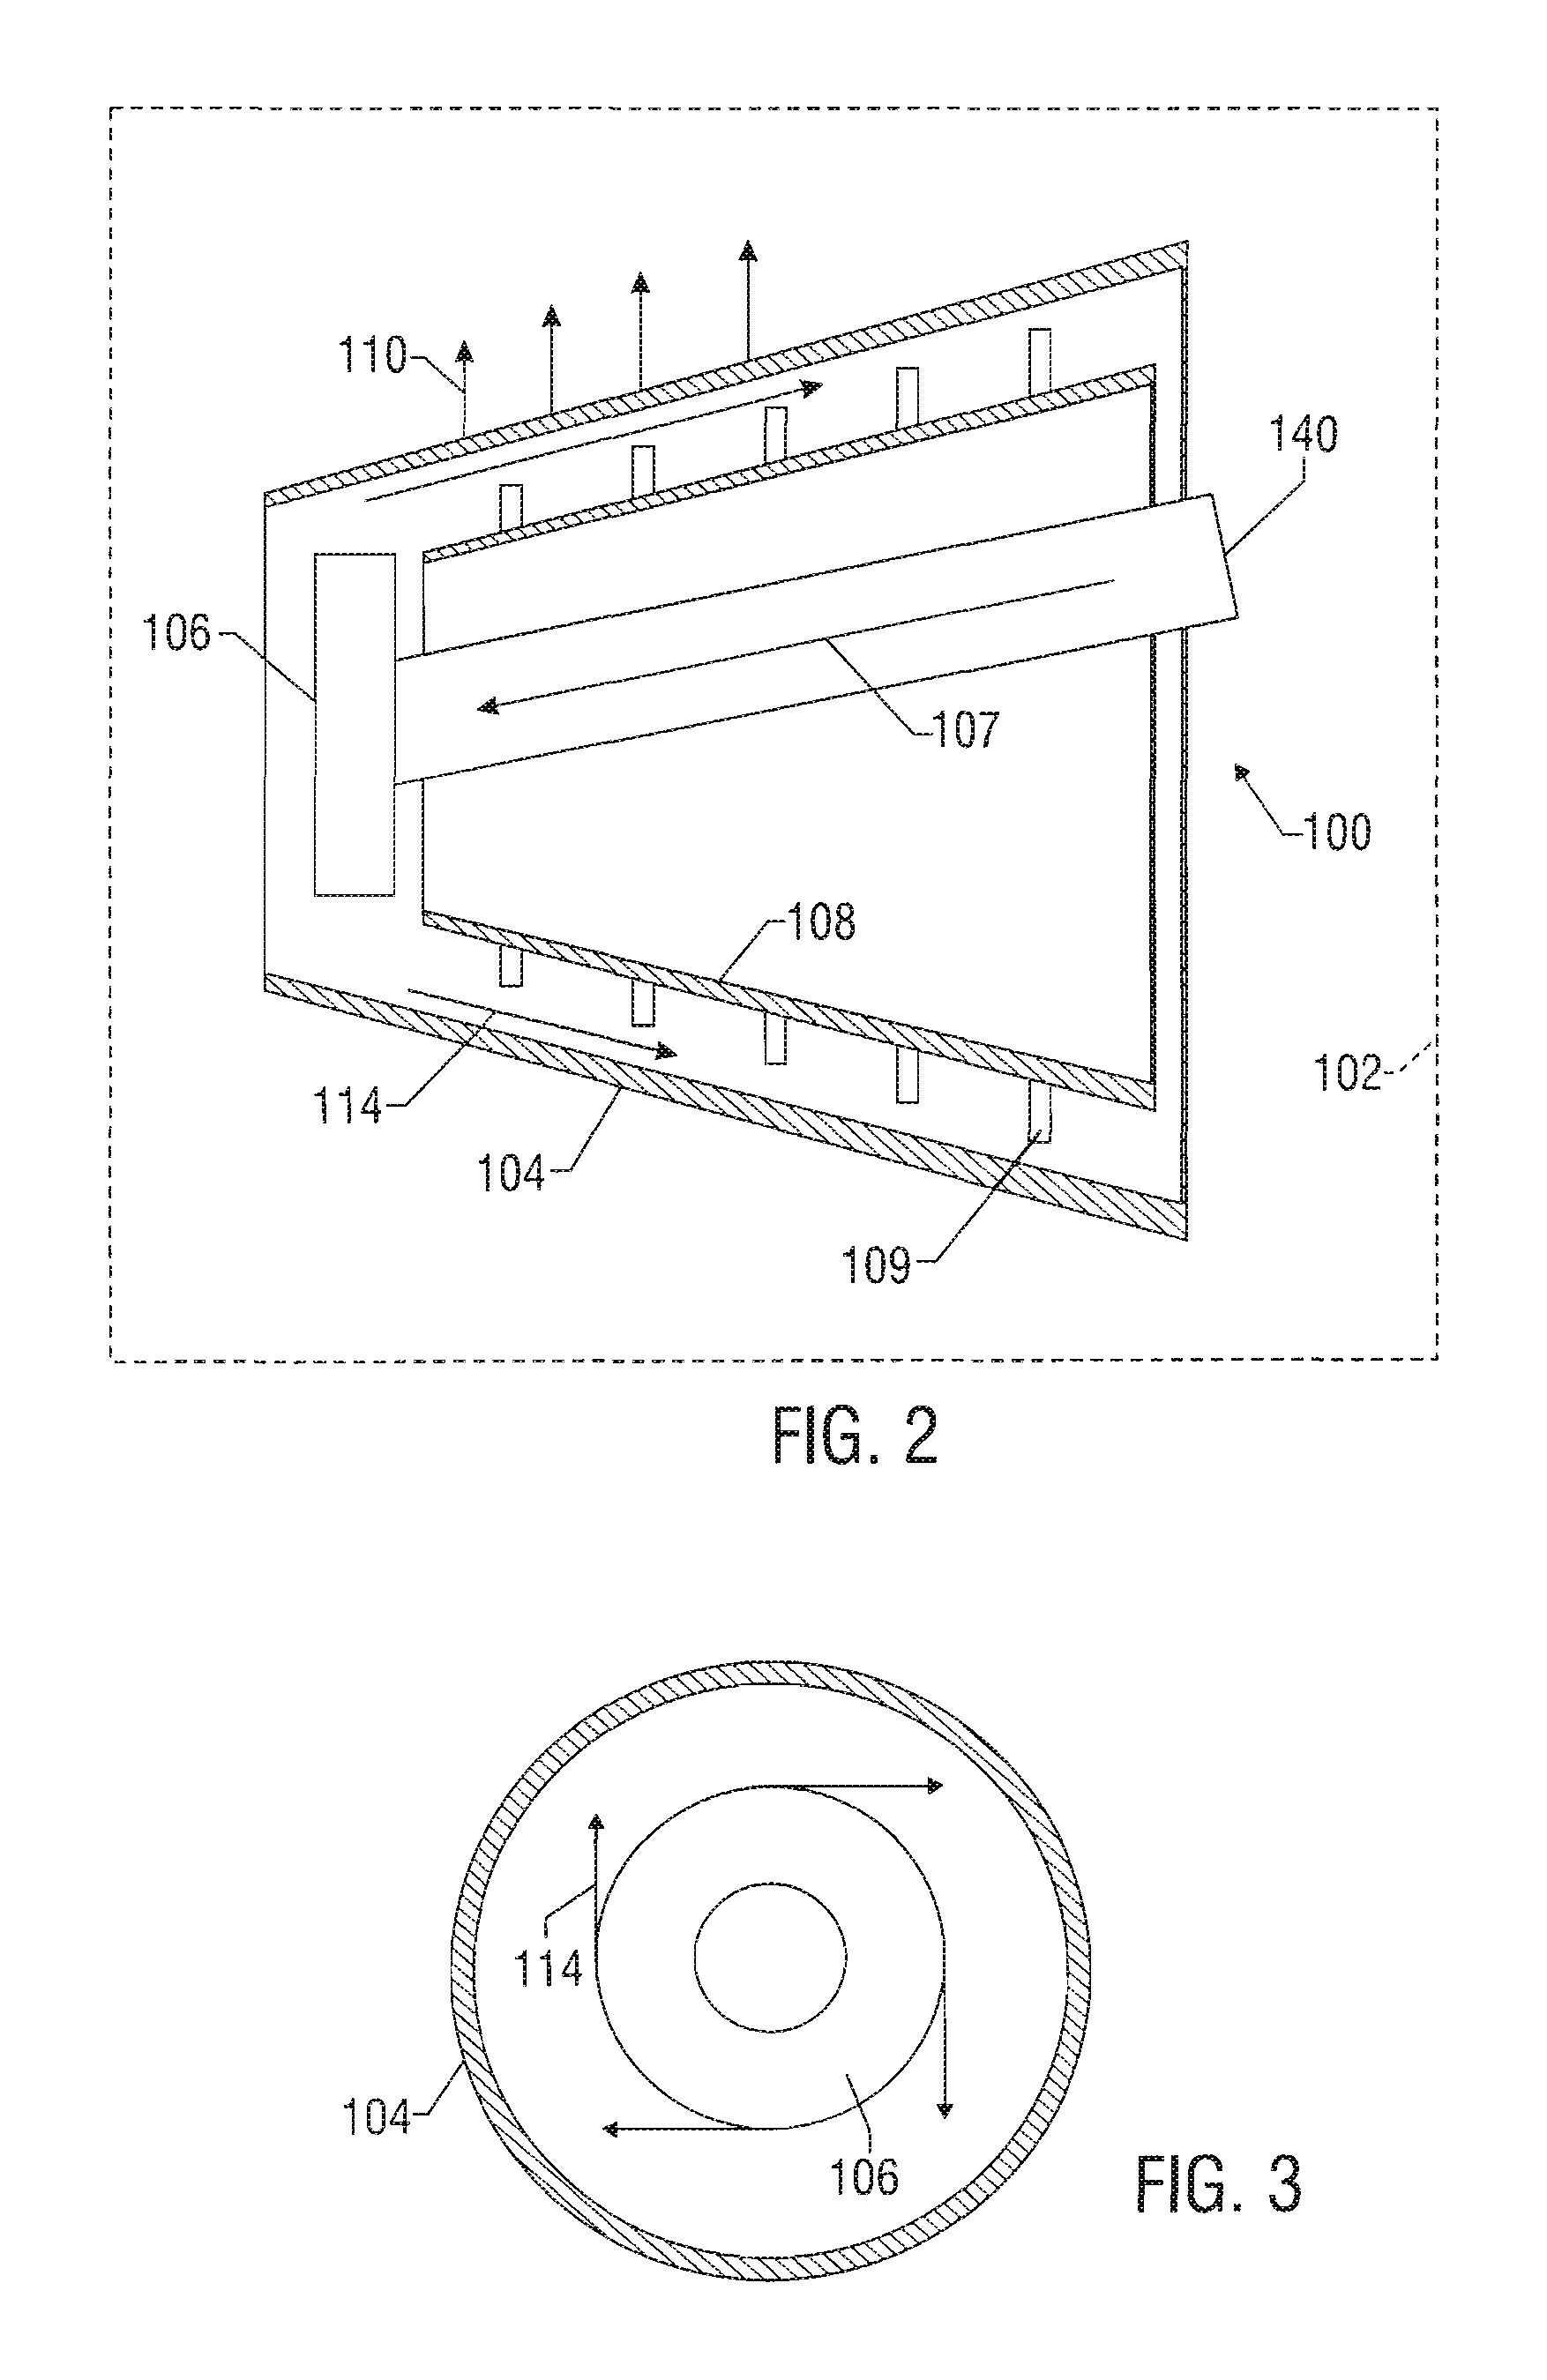 System and method for processing drilling cuttings during offshore drilling